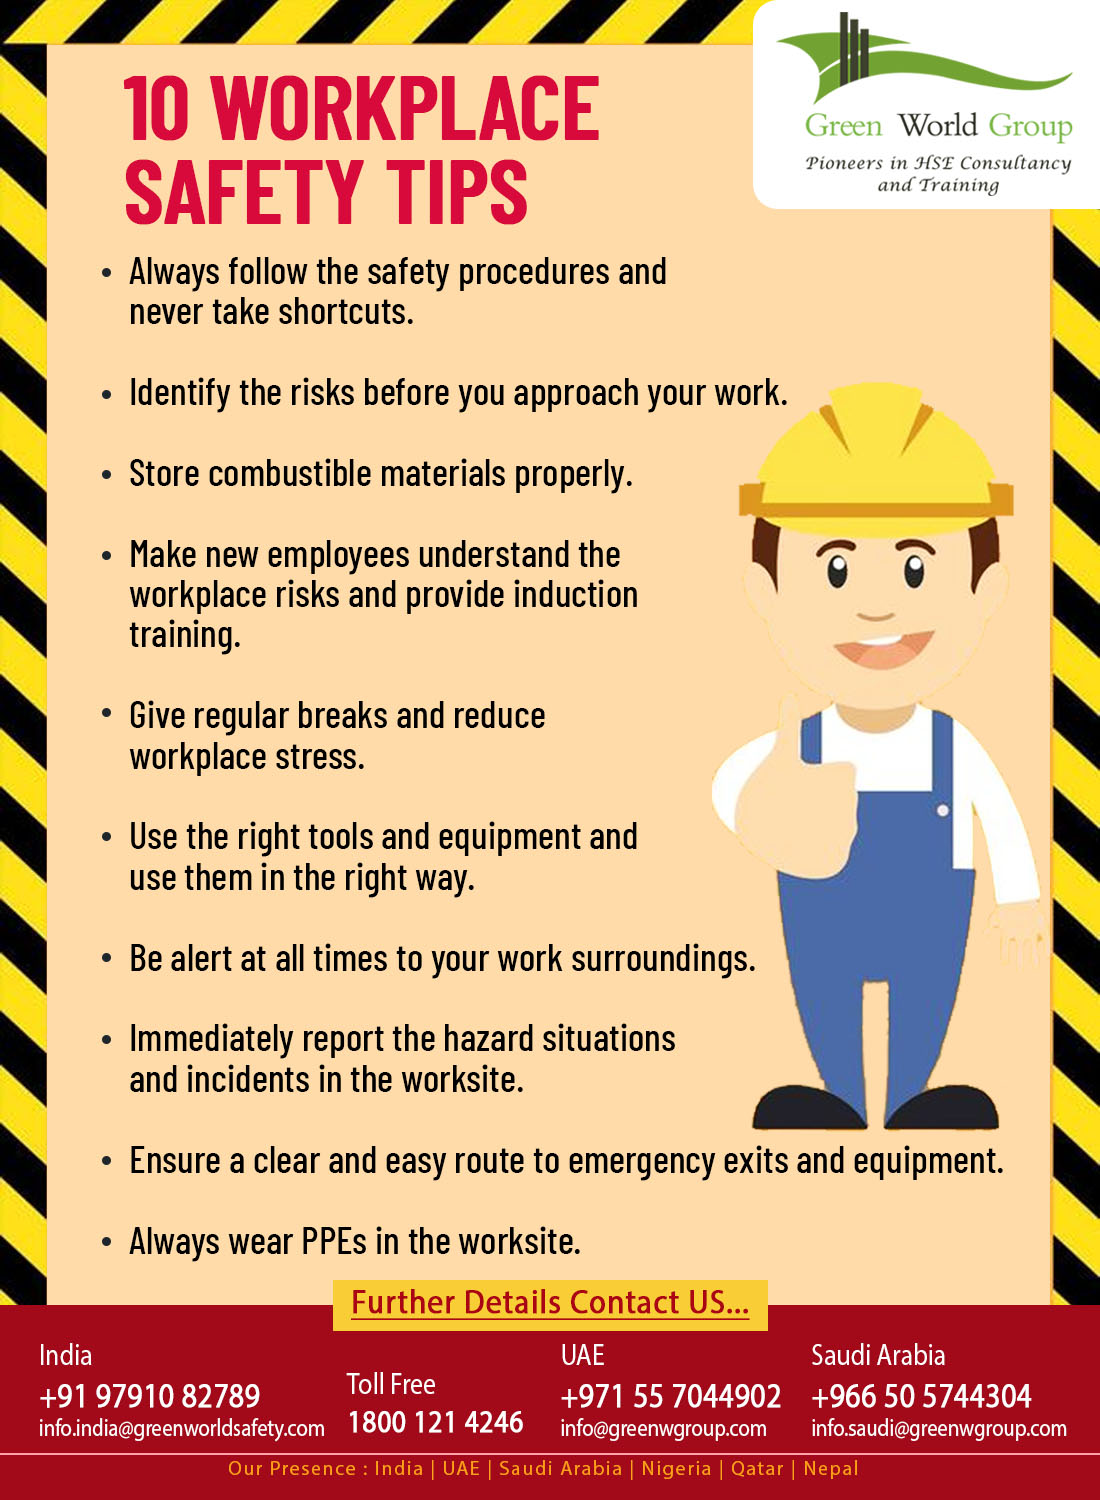 10 Rules For Workplace Safety Safety Poster Shop - Riset